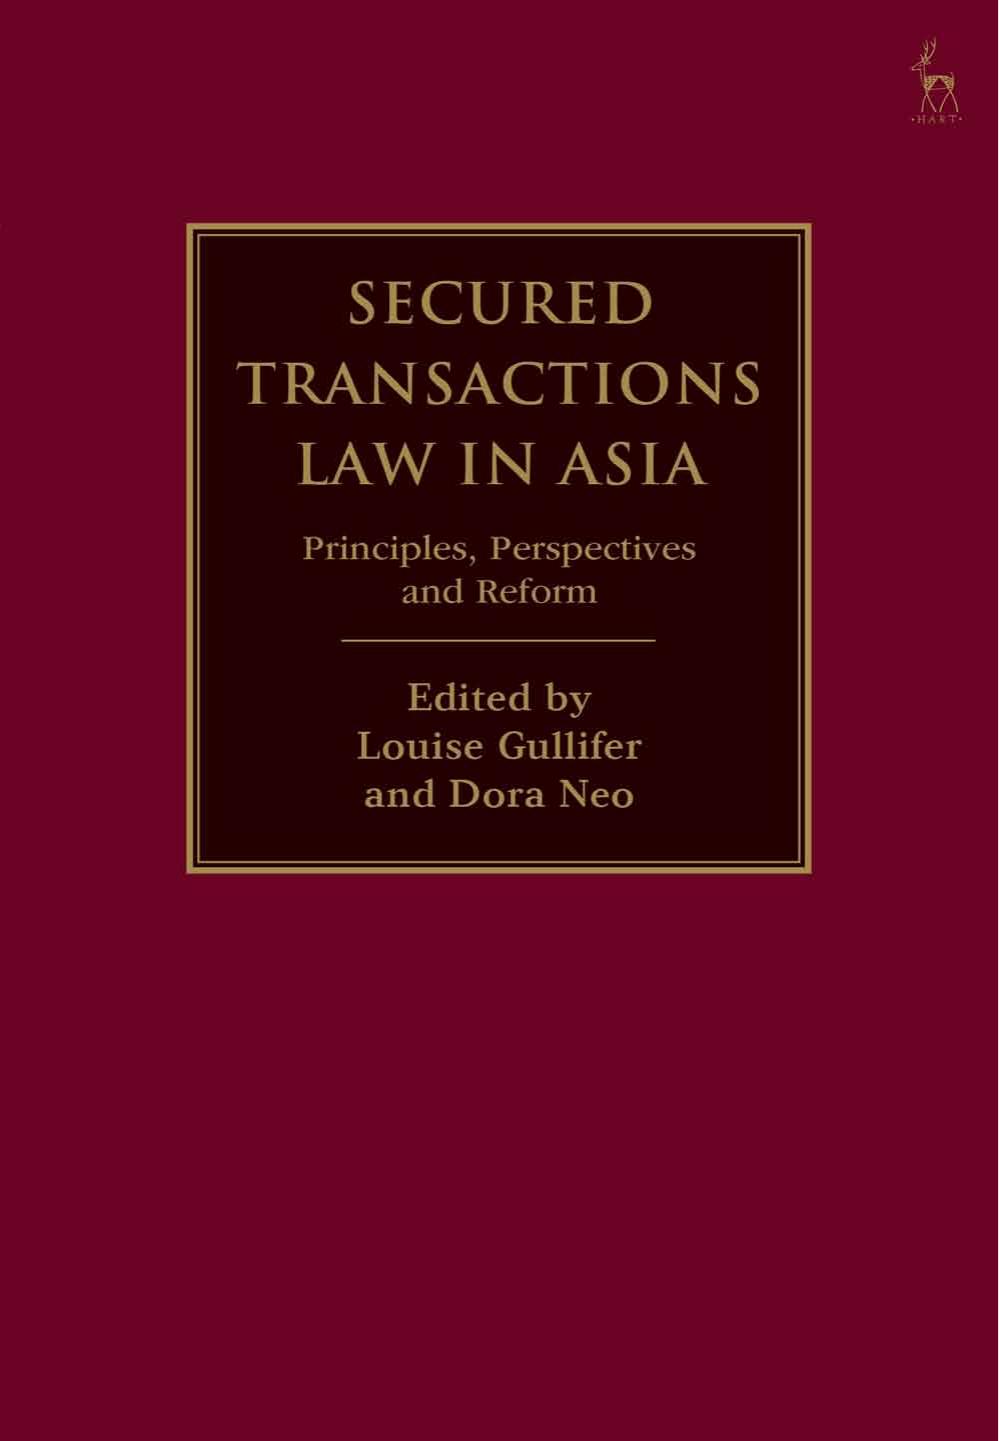 Secured Transactions Law in Asia: Principles, Perspectives and Reform by Louise Gullifer; Dora Neo (editors)